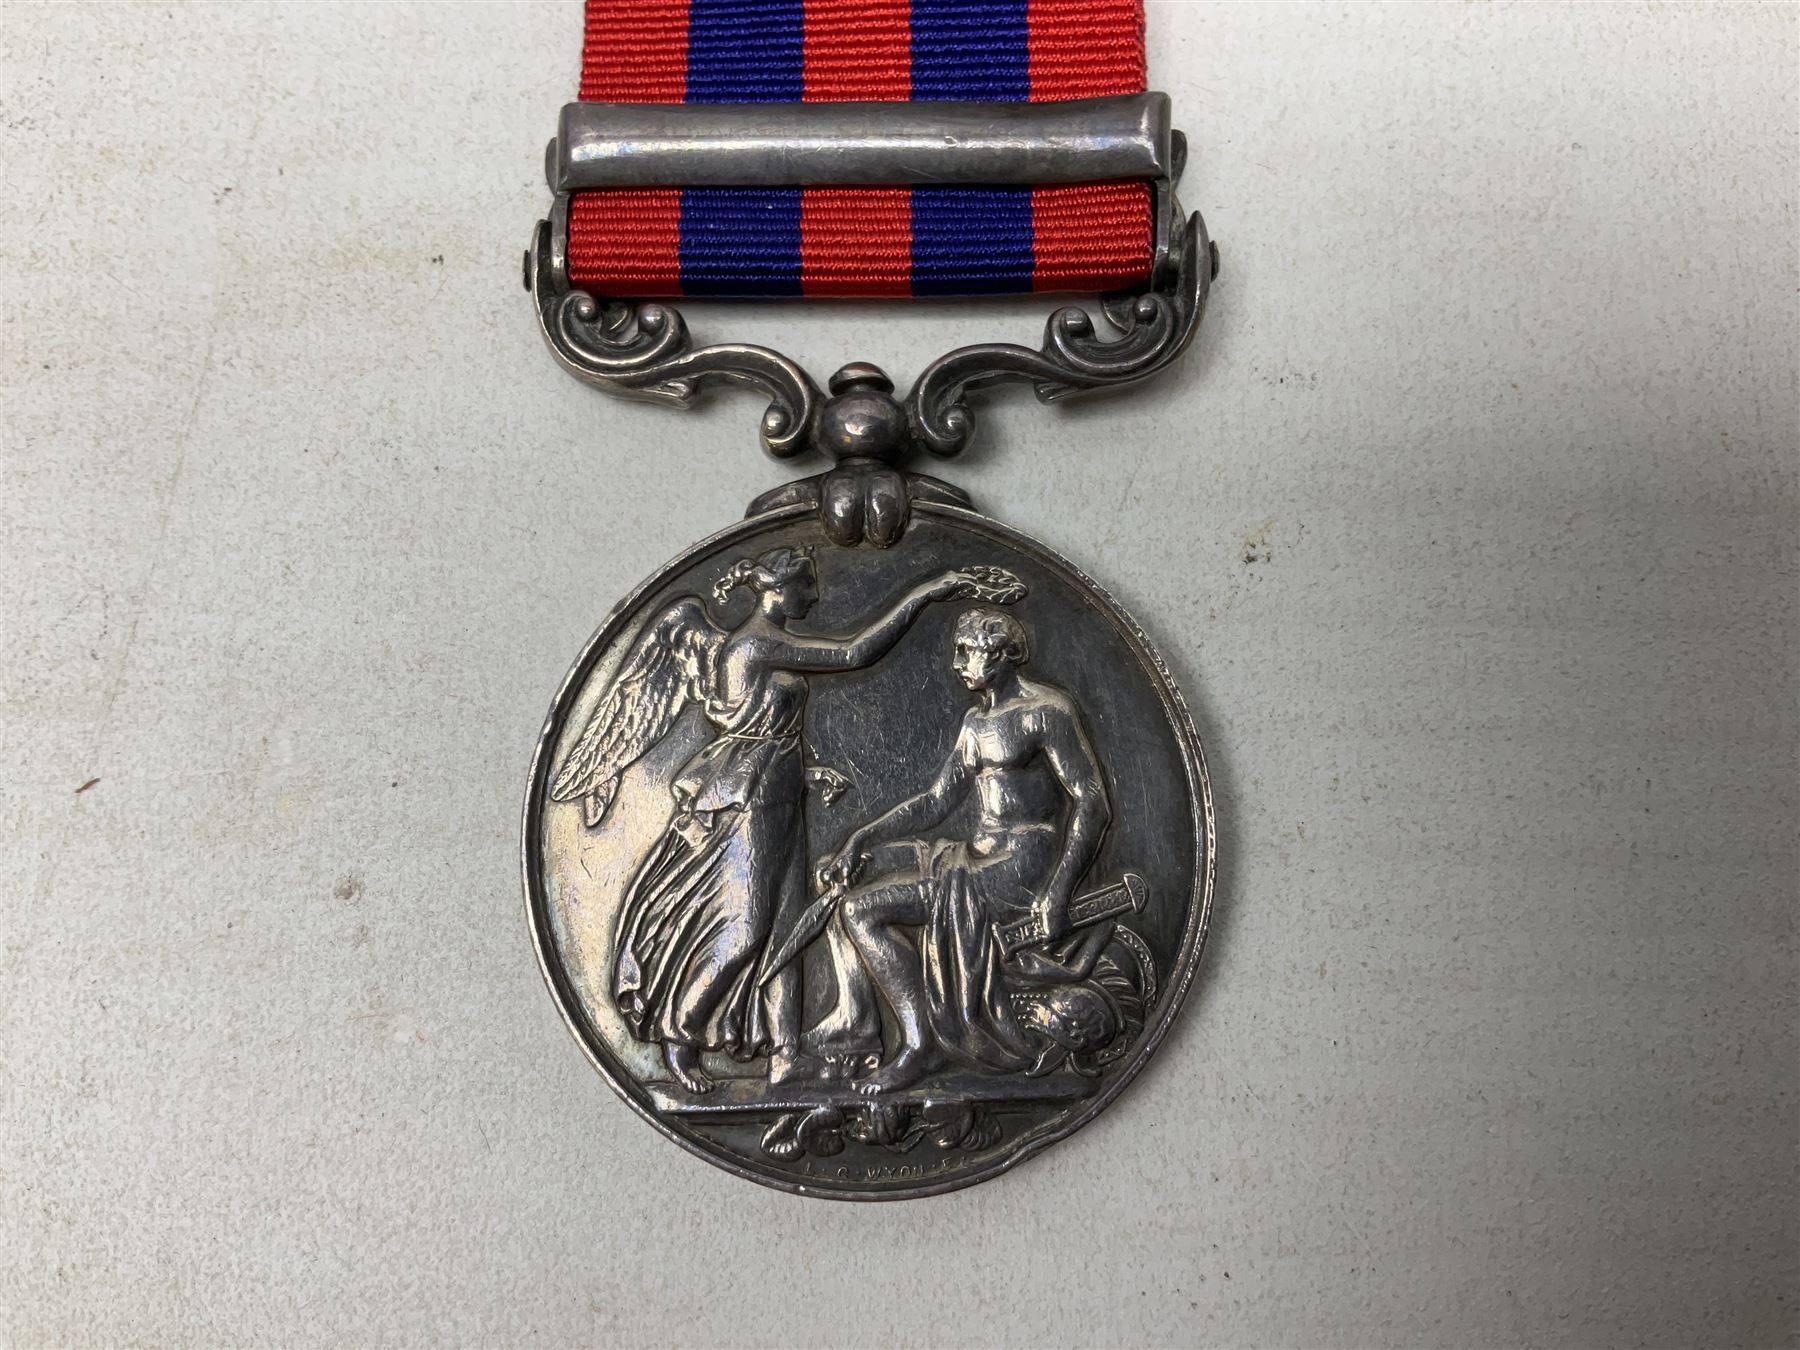 Victoria India General Service Medal with Burma 1885-7 clasp awarded to 1771 Pte. W. Alderman 2nd Bn - Image 7 of 10